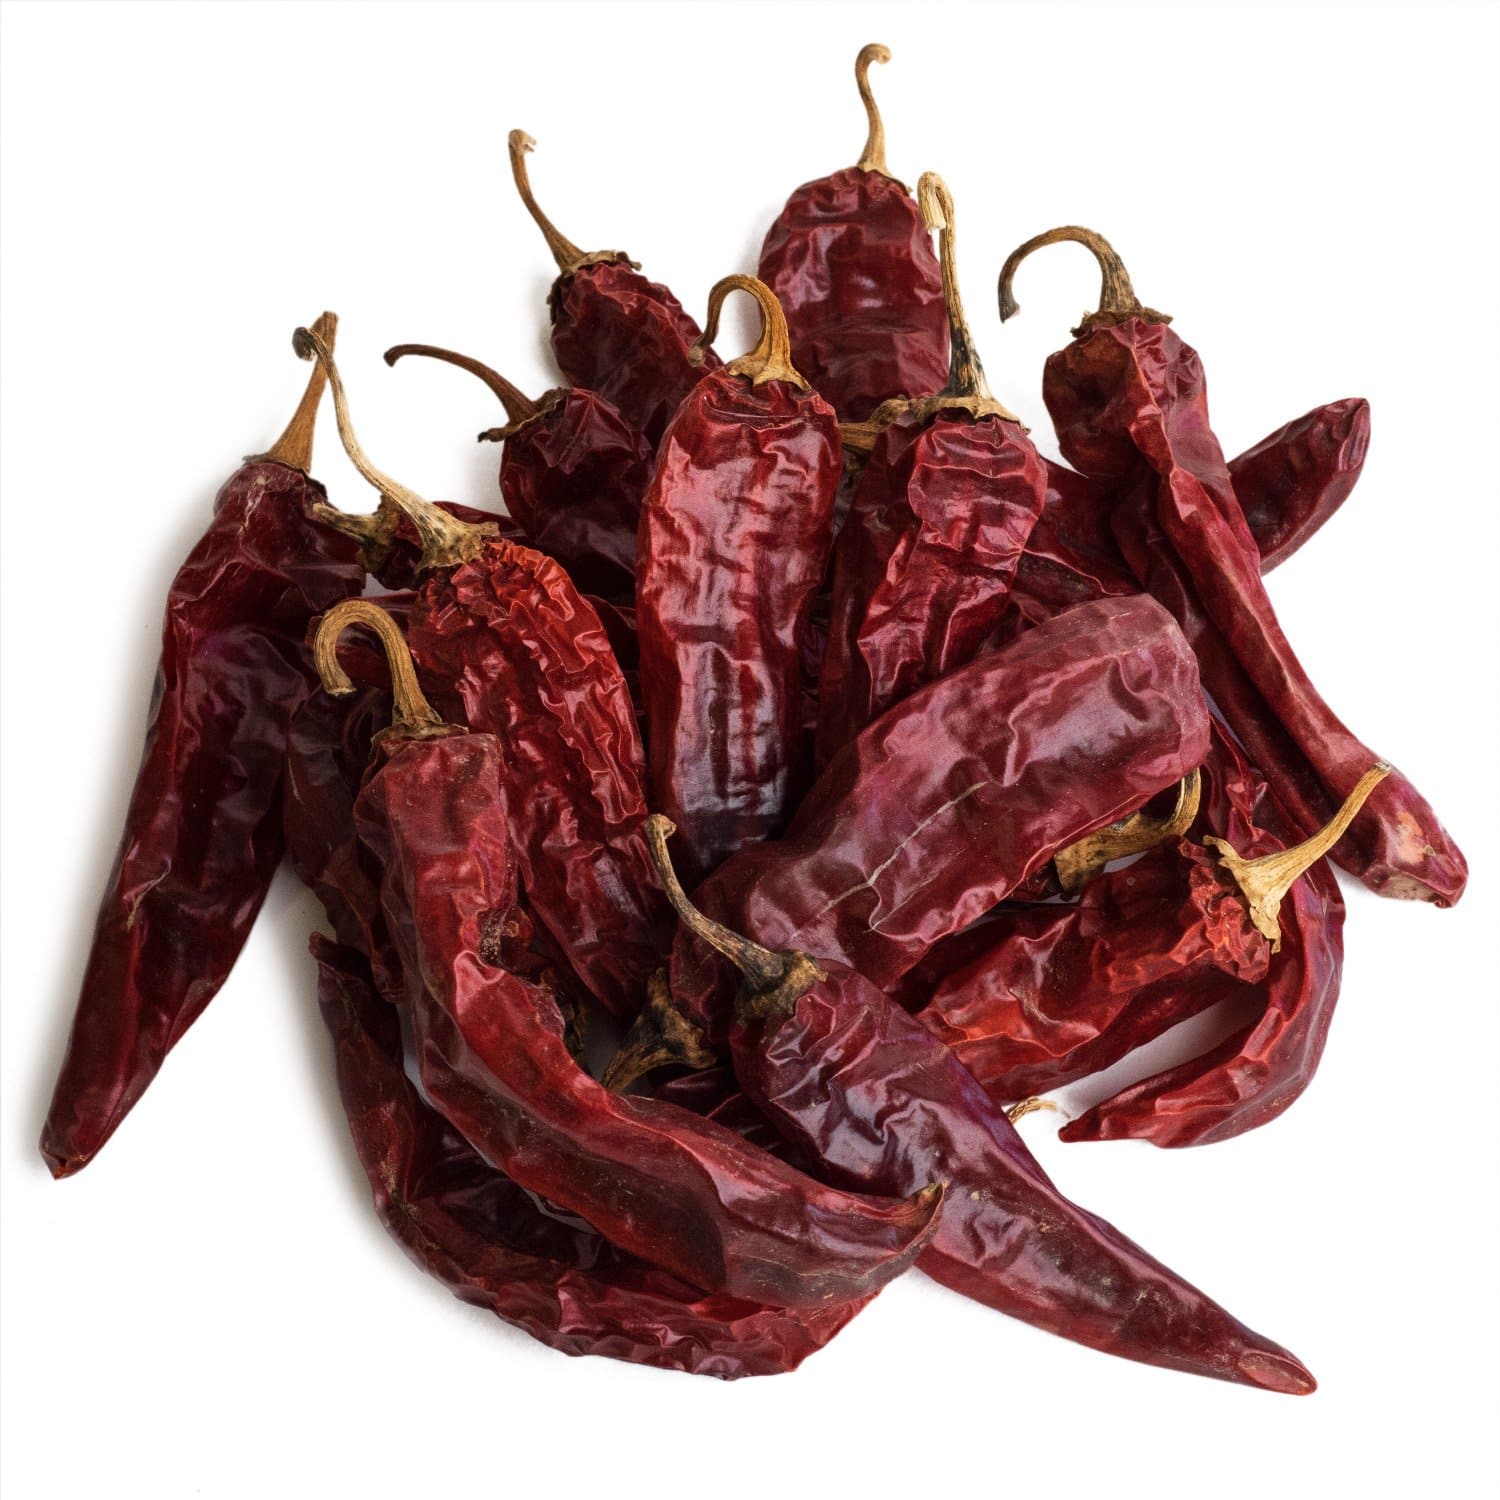 A pile of Dried Hatch Red Chile Pods with wrinkled textures and intact stems, isolated on a white background.